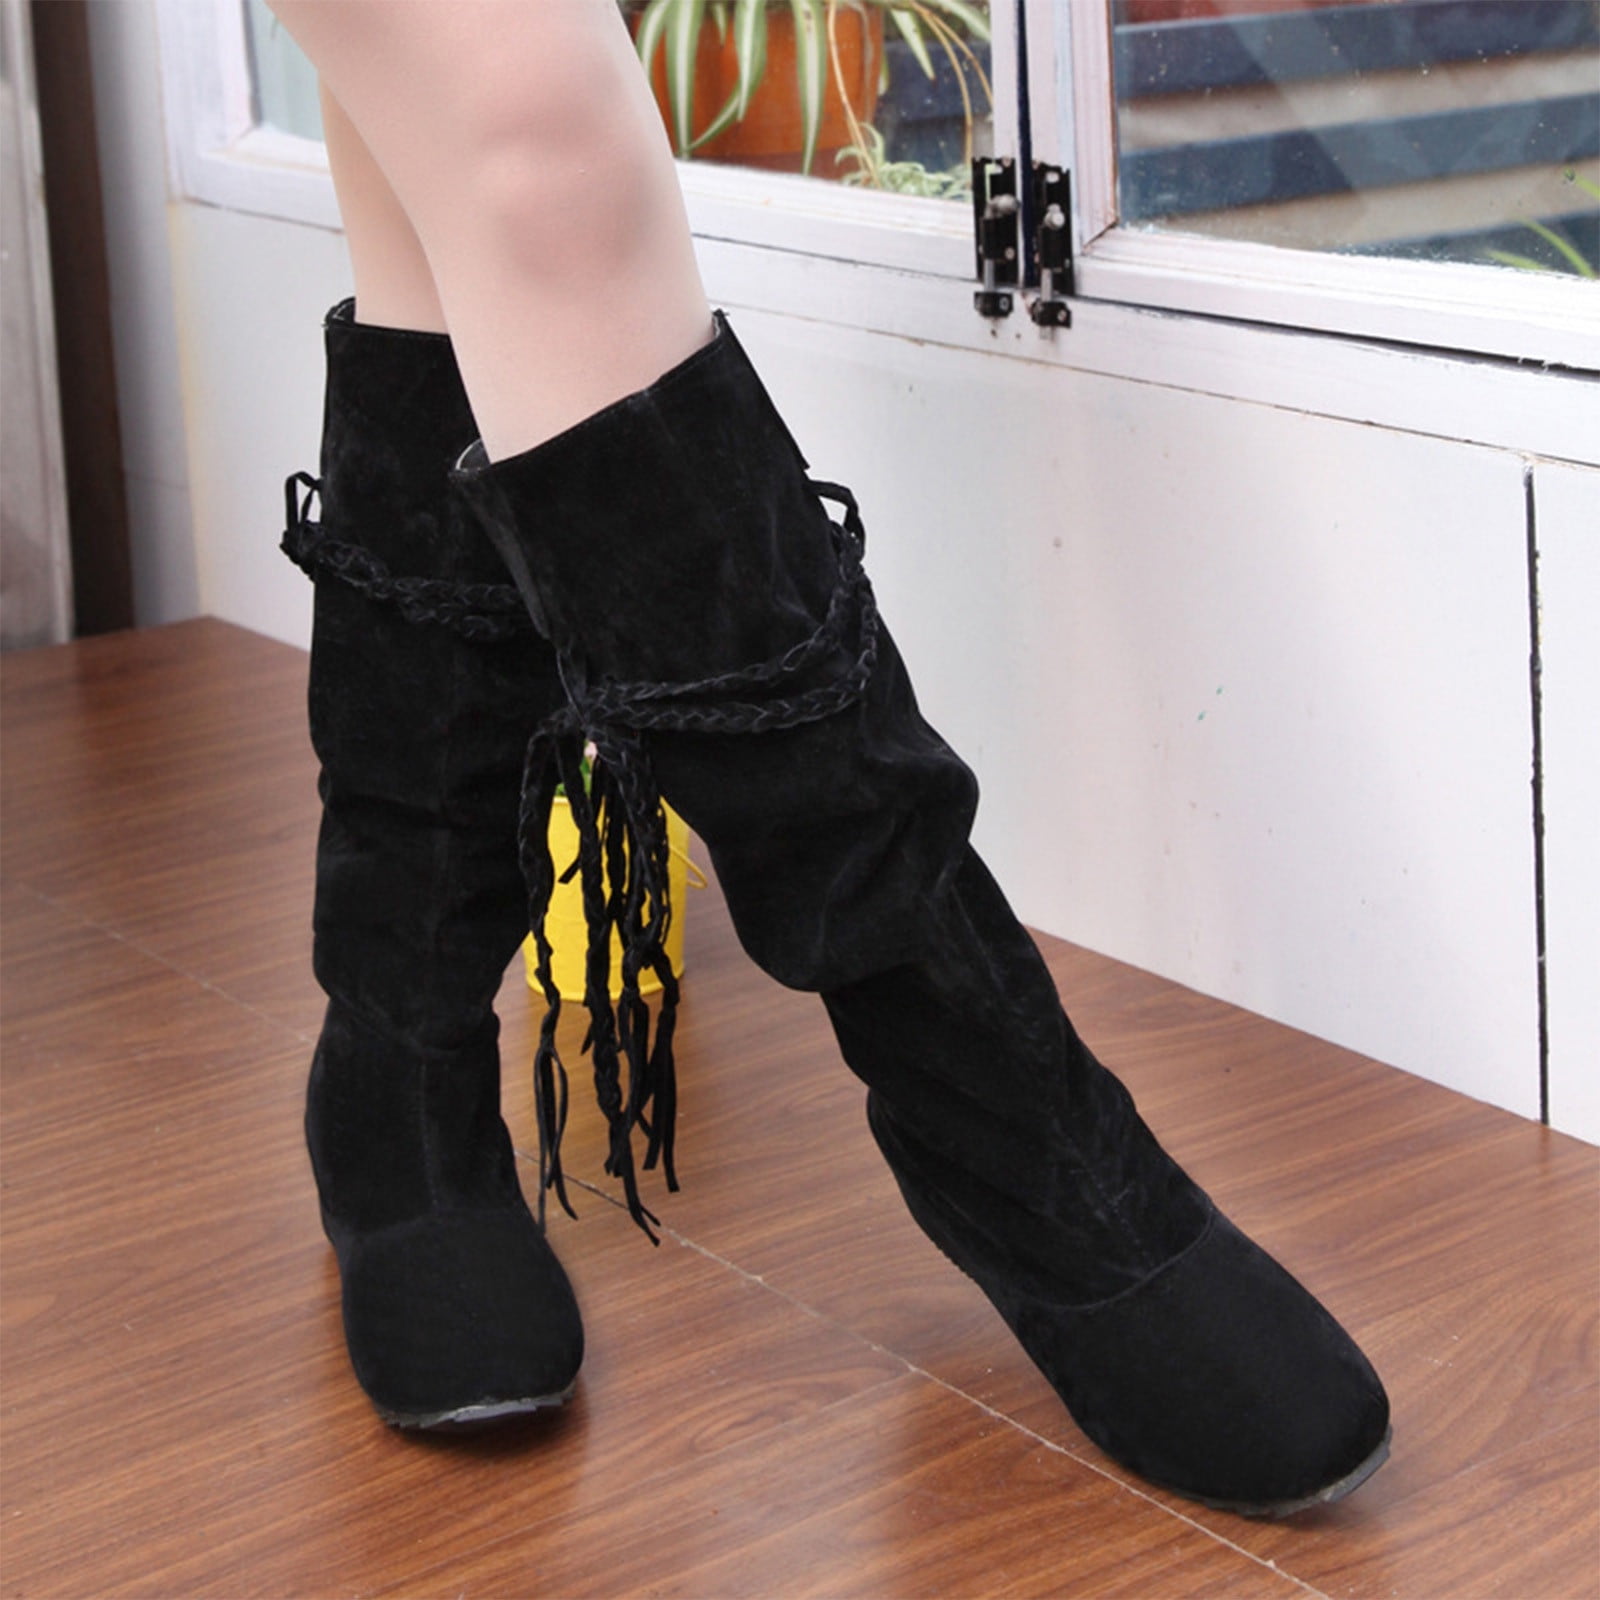 WINTER WOMEN THIGH OVER THE KNEE HIGH FLAT BOOTS SLOUCH FAUX WARM SUEDE SHOES N 